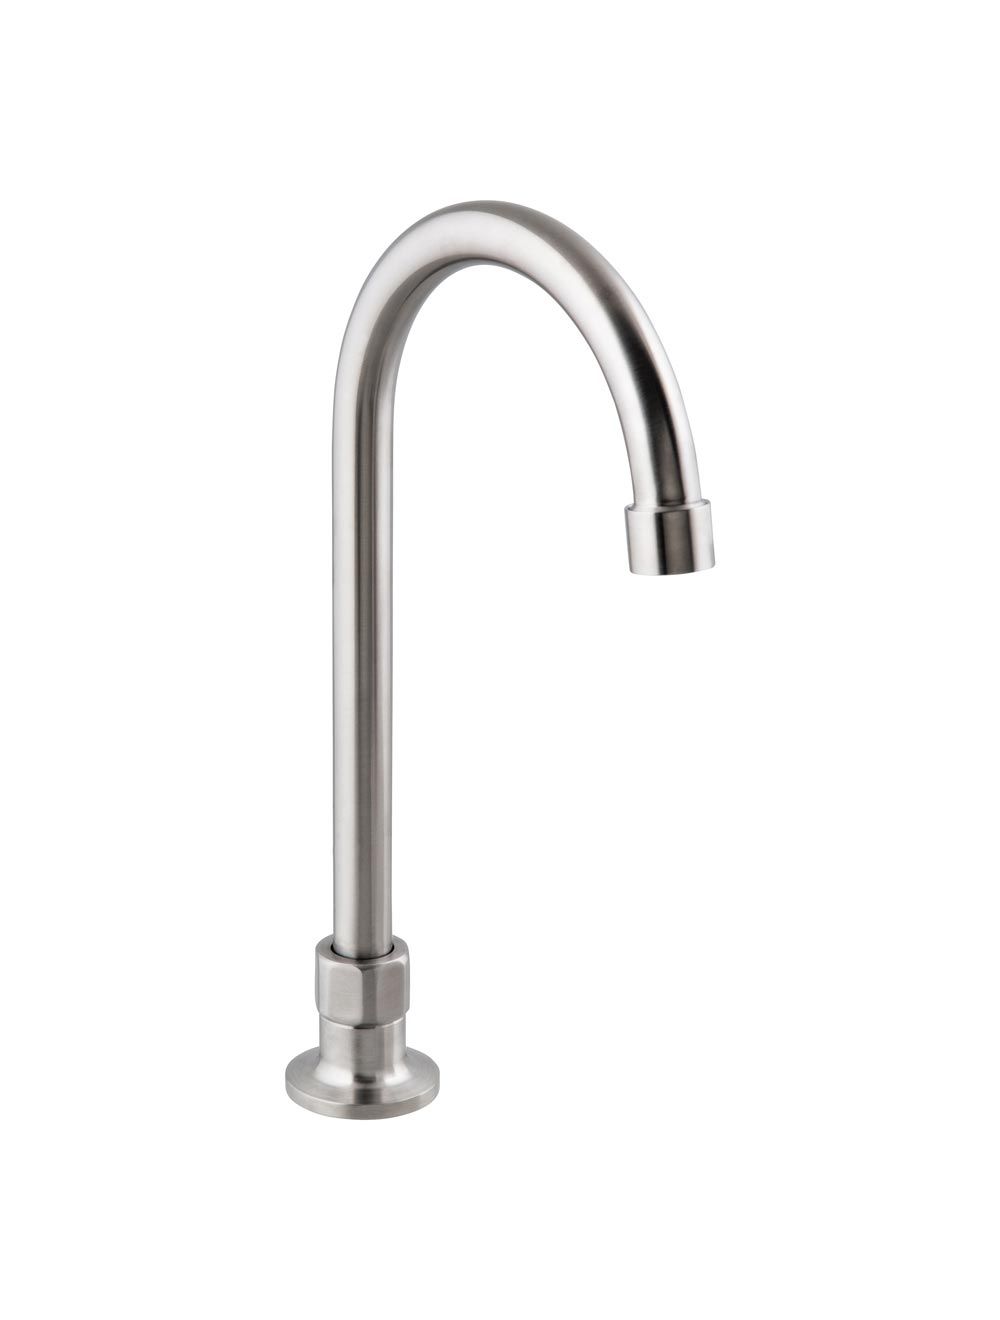 Stainless Steel Single Hob Mount (No Stops) with Gooseneck Spout